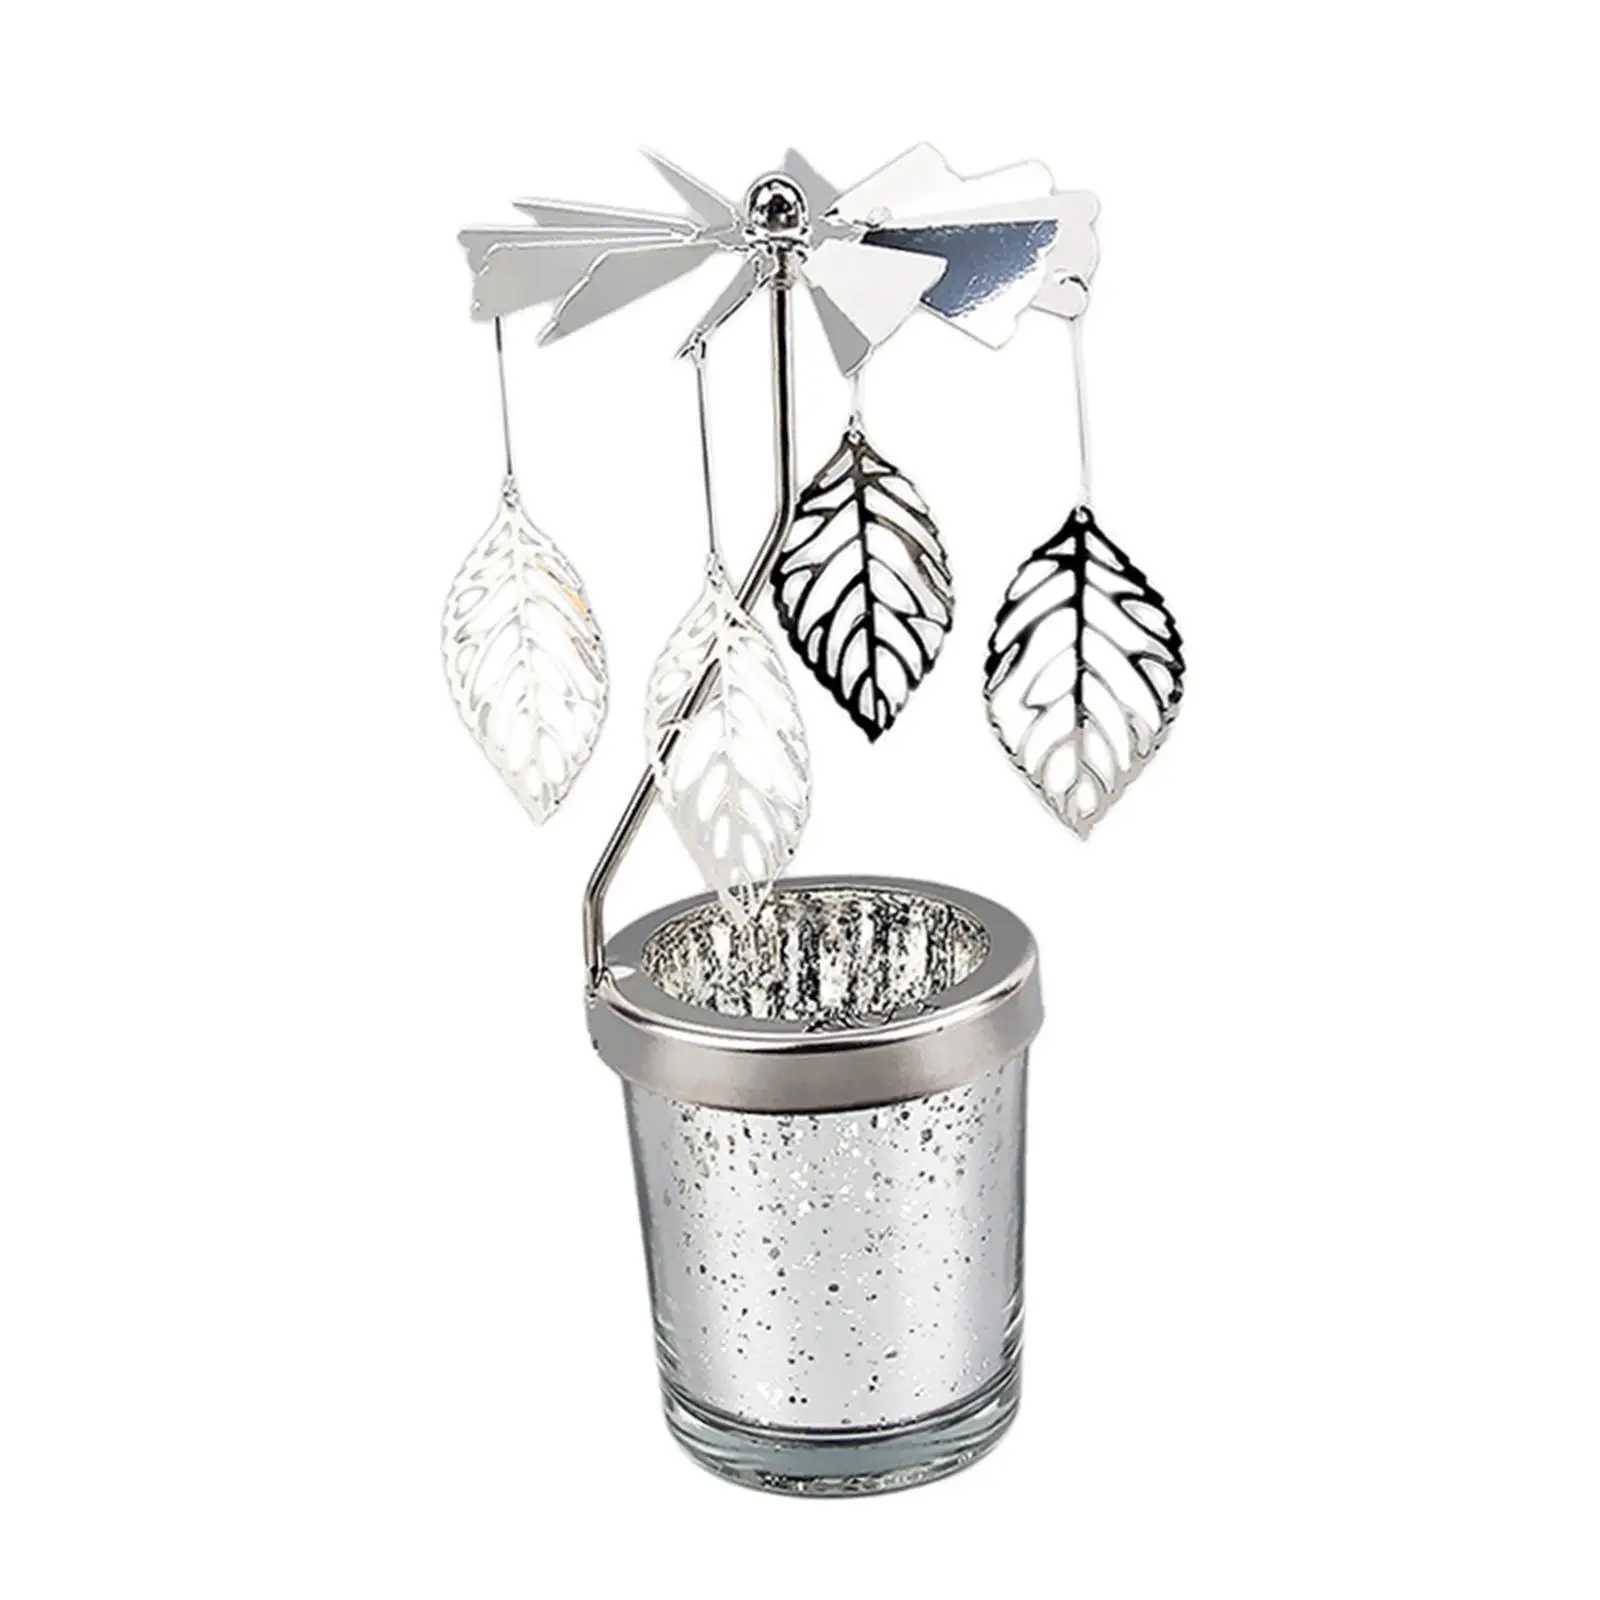 Rotating Candle Holder Table Centerpieces Tray for Wedding Party Festival